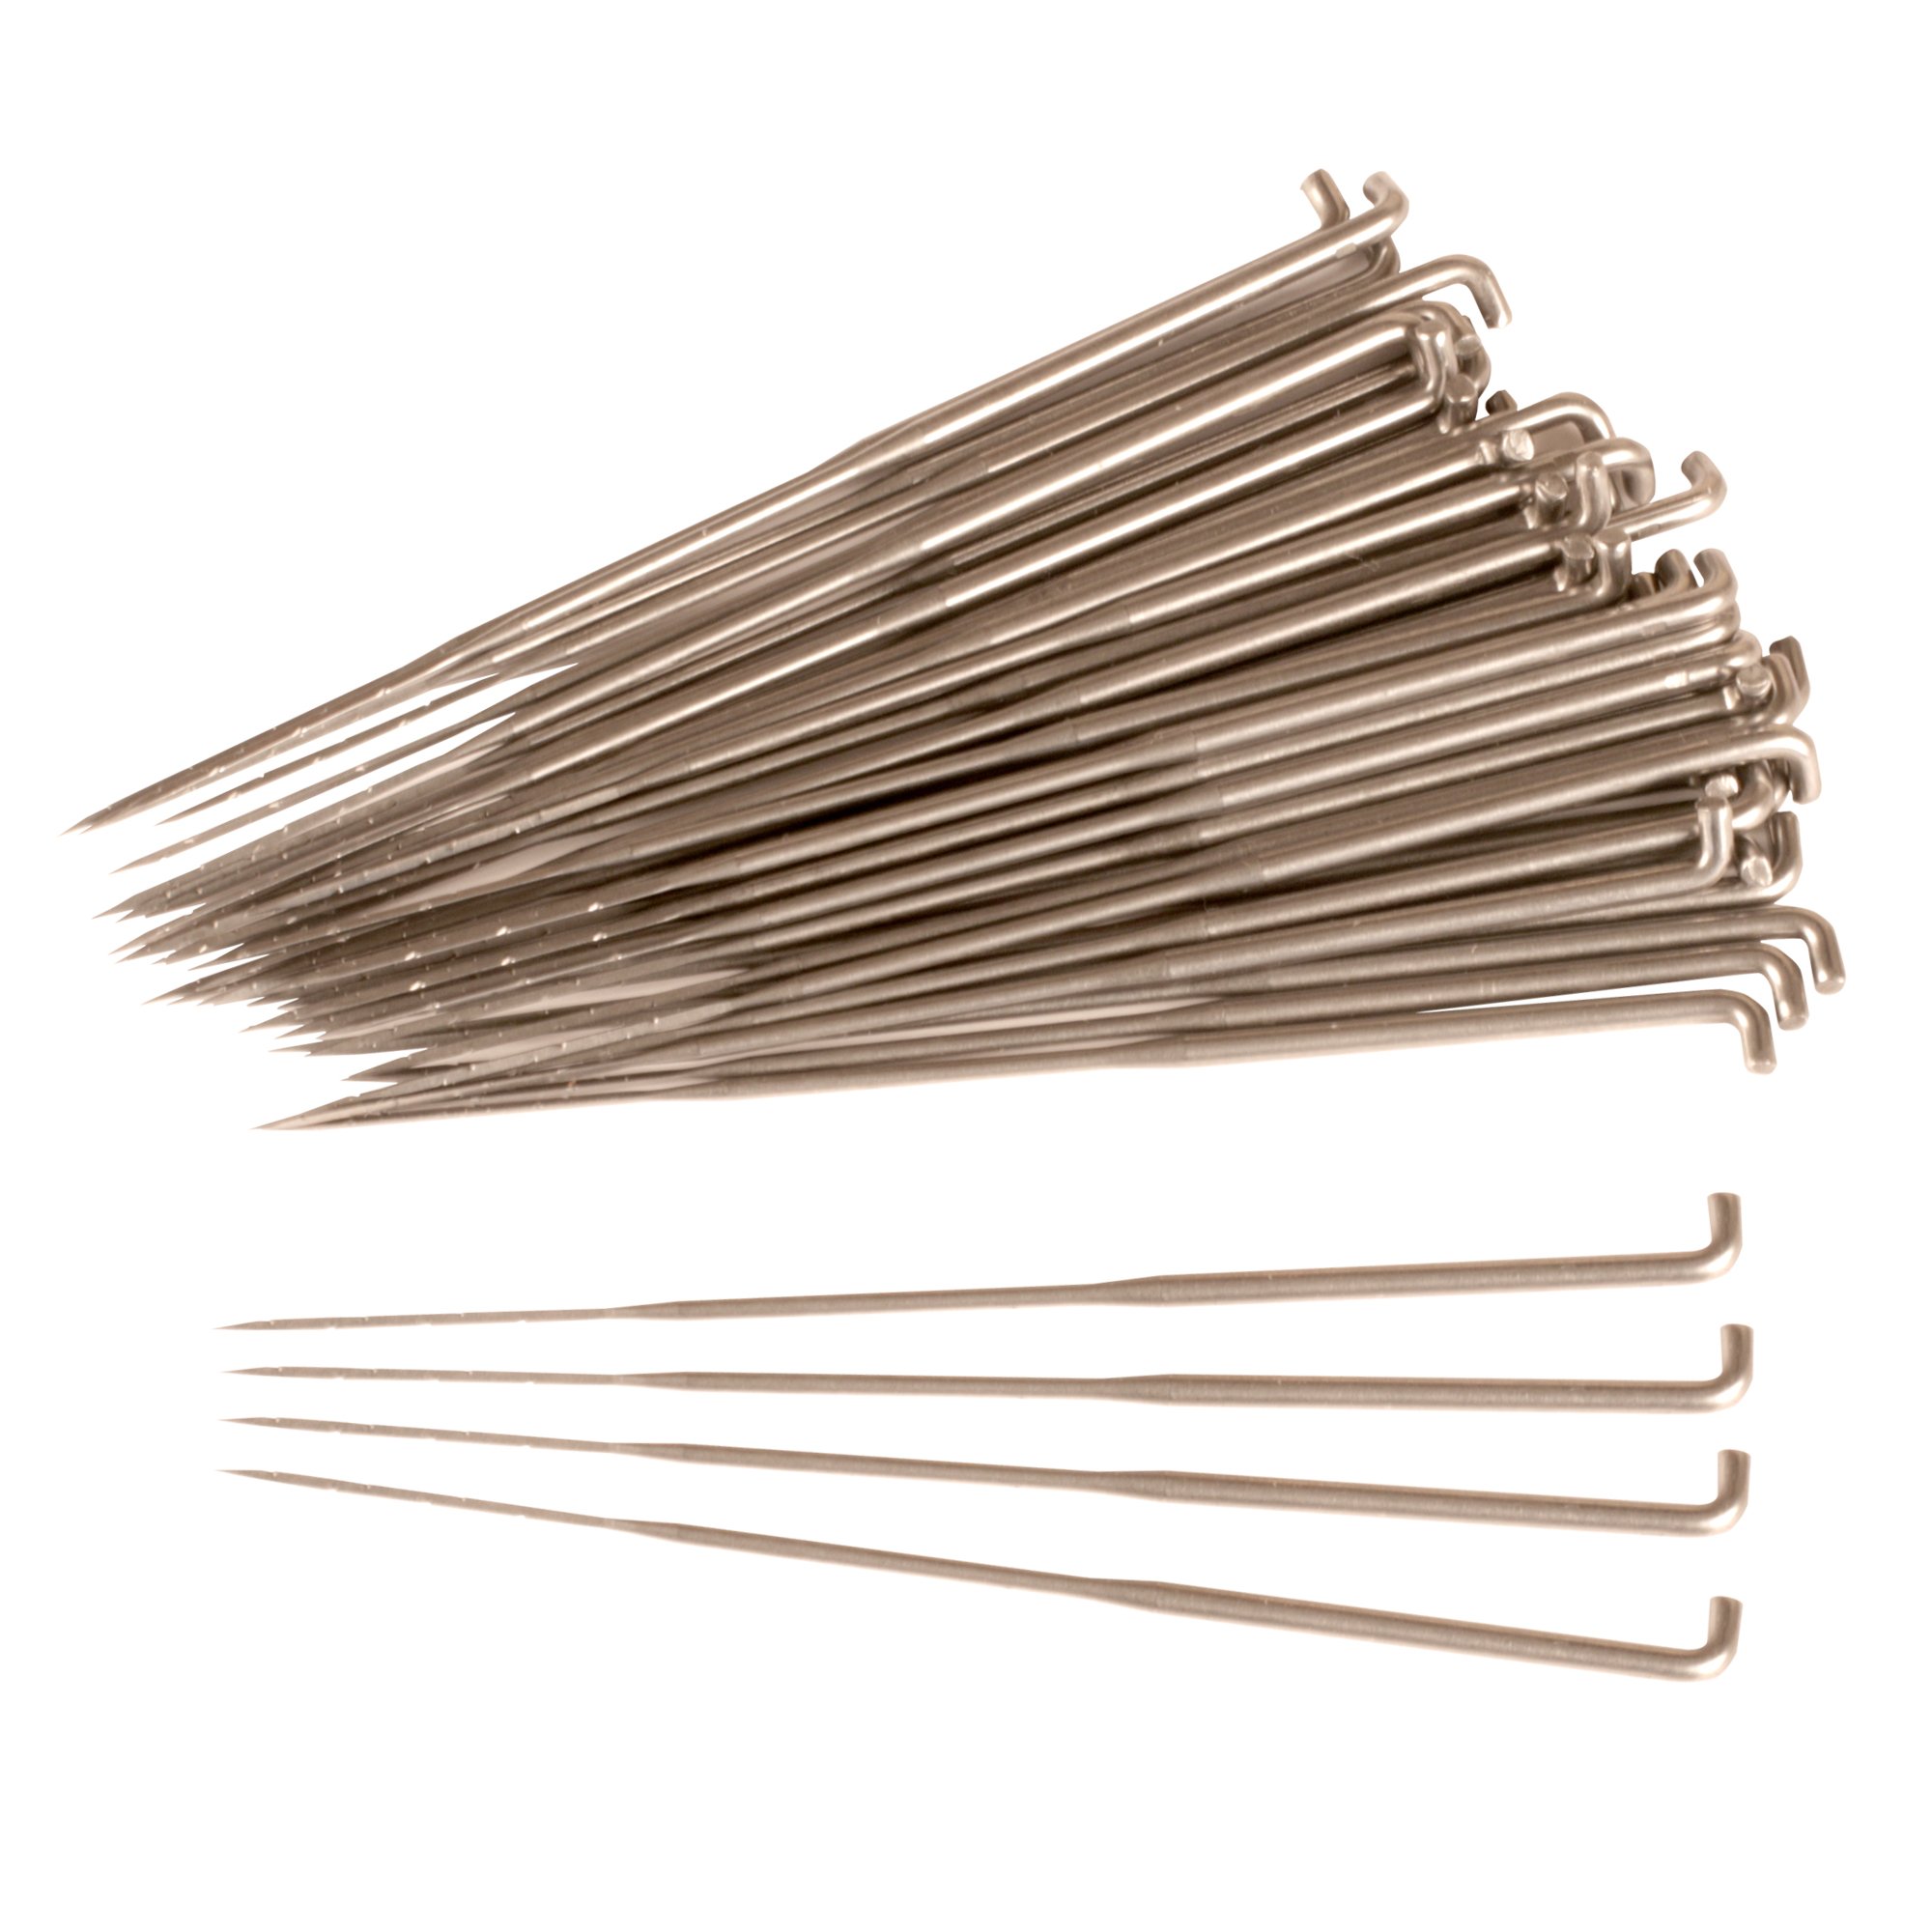 Bizzy Goods - 38 Gauge 50 Felting Needles Bulk Pack Triangular Point 3 Inch  Long 9 Total Barbs with Medium Sized Spacing 3 Barbs Each Edge with 3 Edges  Set of 50 Needles.